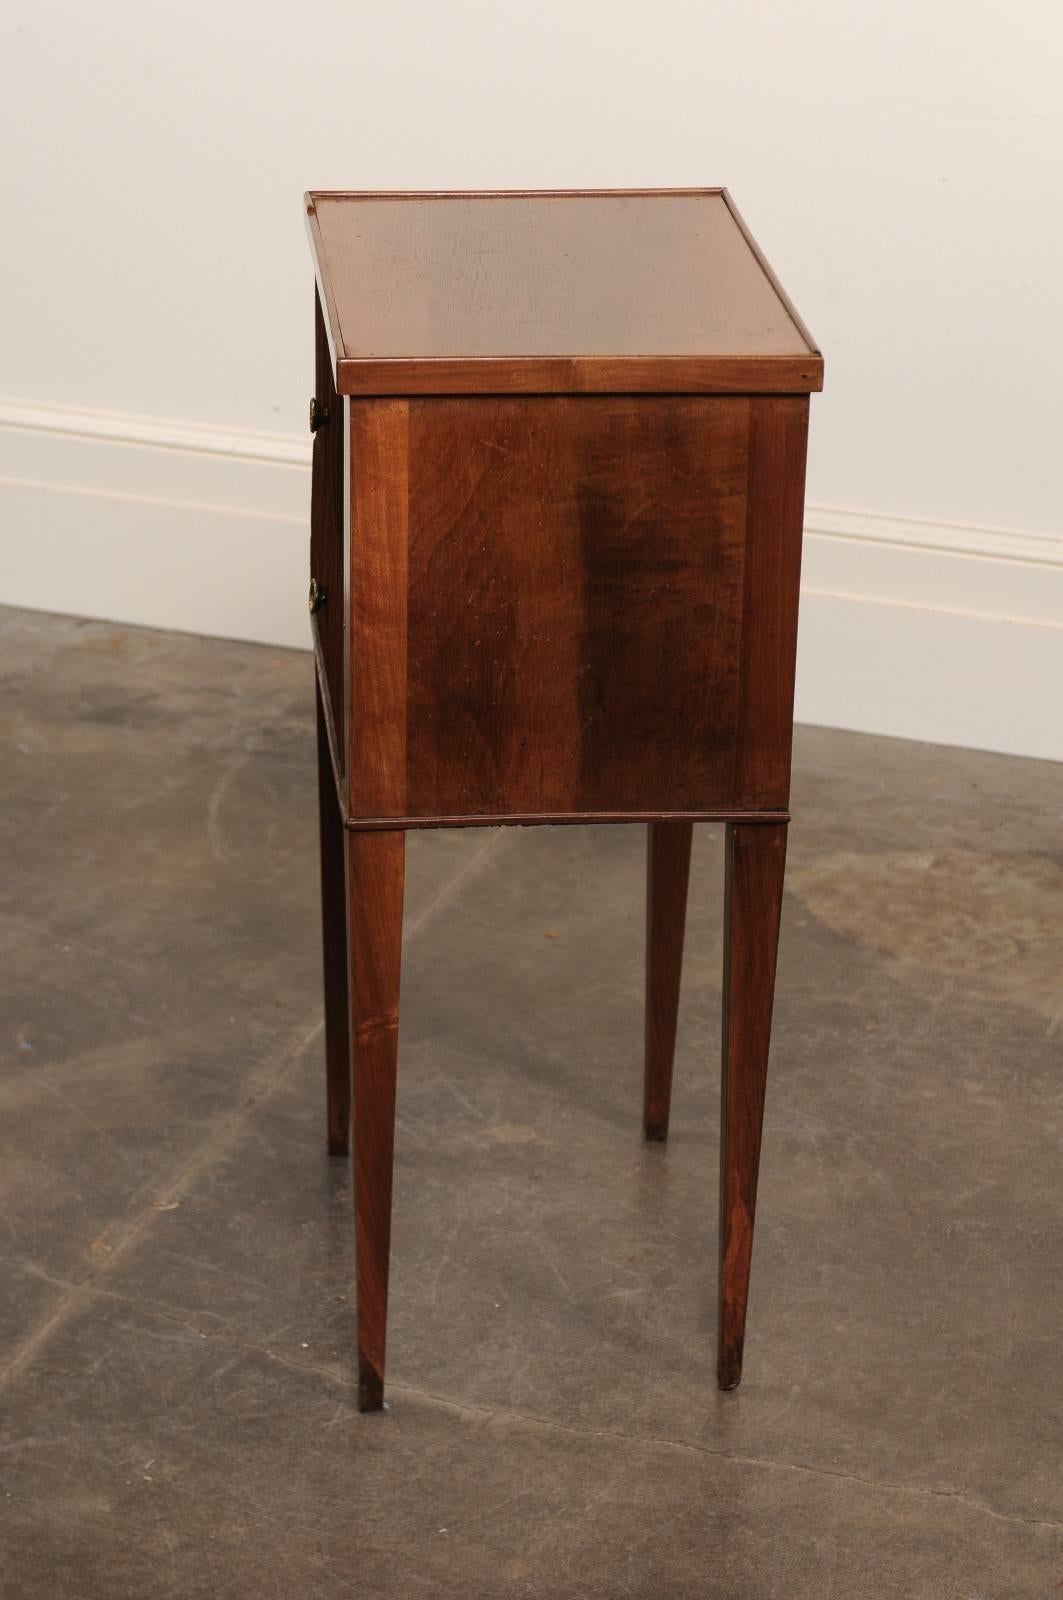 French Mahogany Turn of the Century Side Table with Two Drawers and Tapered Legs 3